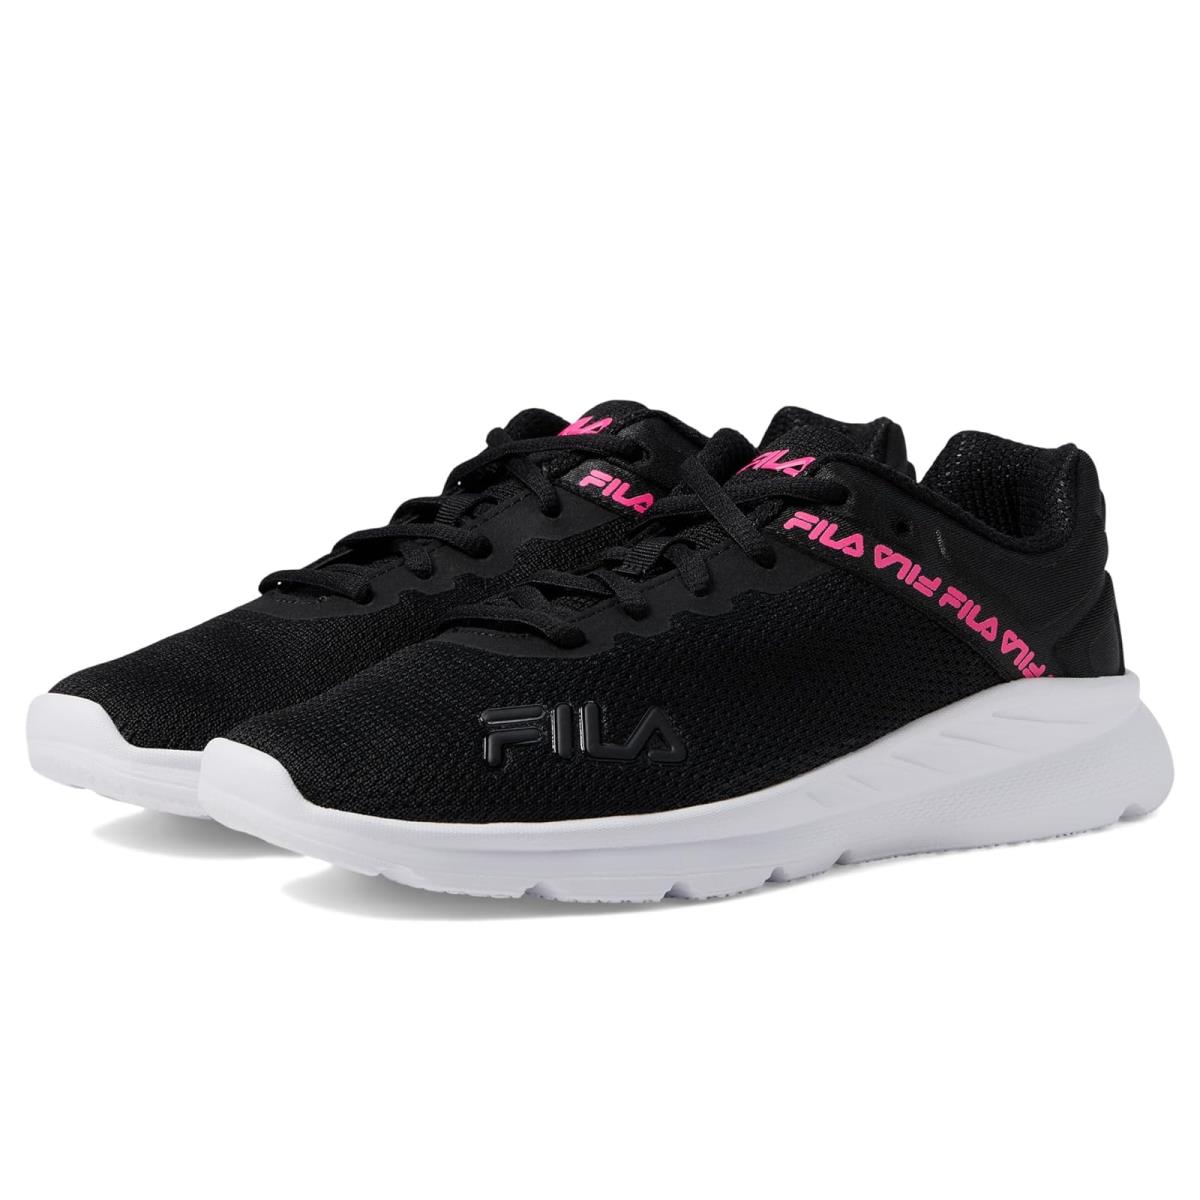 Woman`s Sneakers Athletic Shoes Fila Lightsp Black/Pink Glo/White